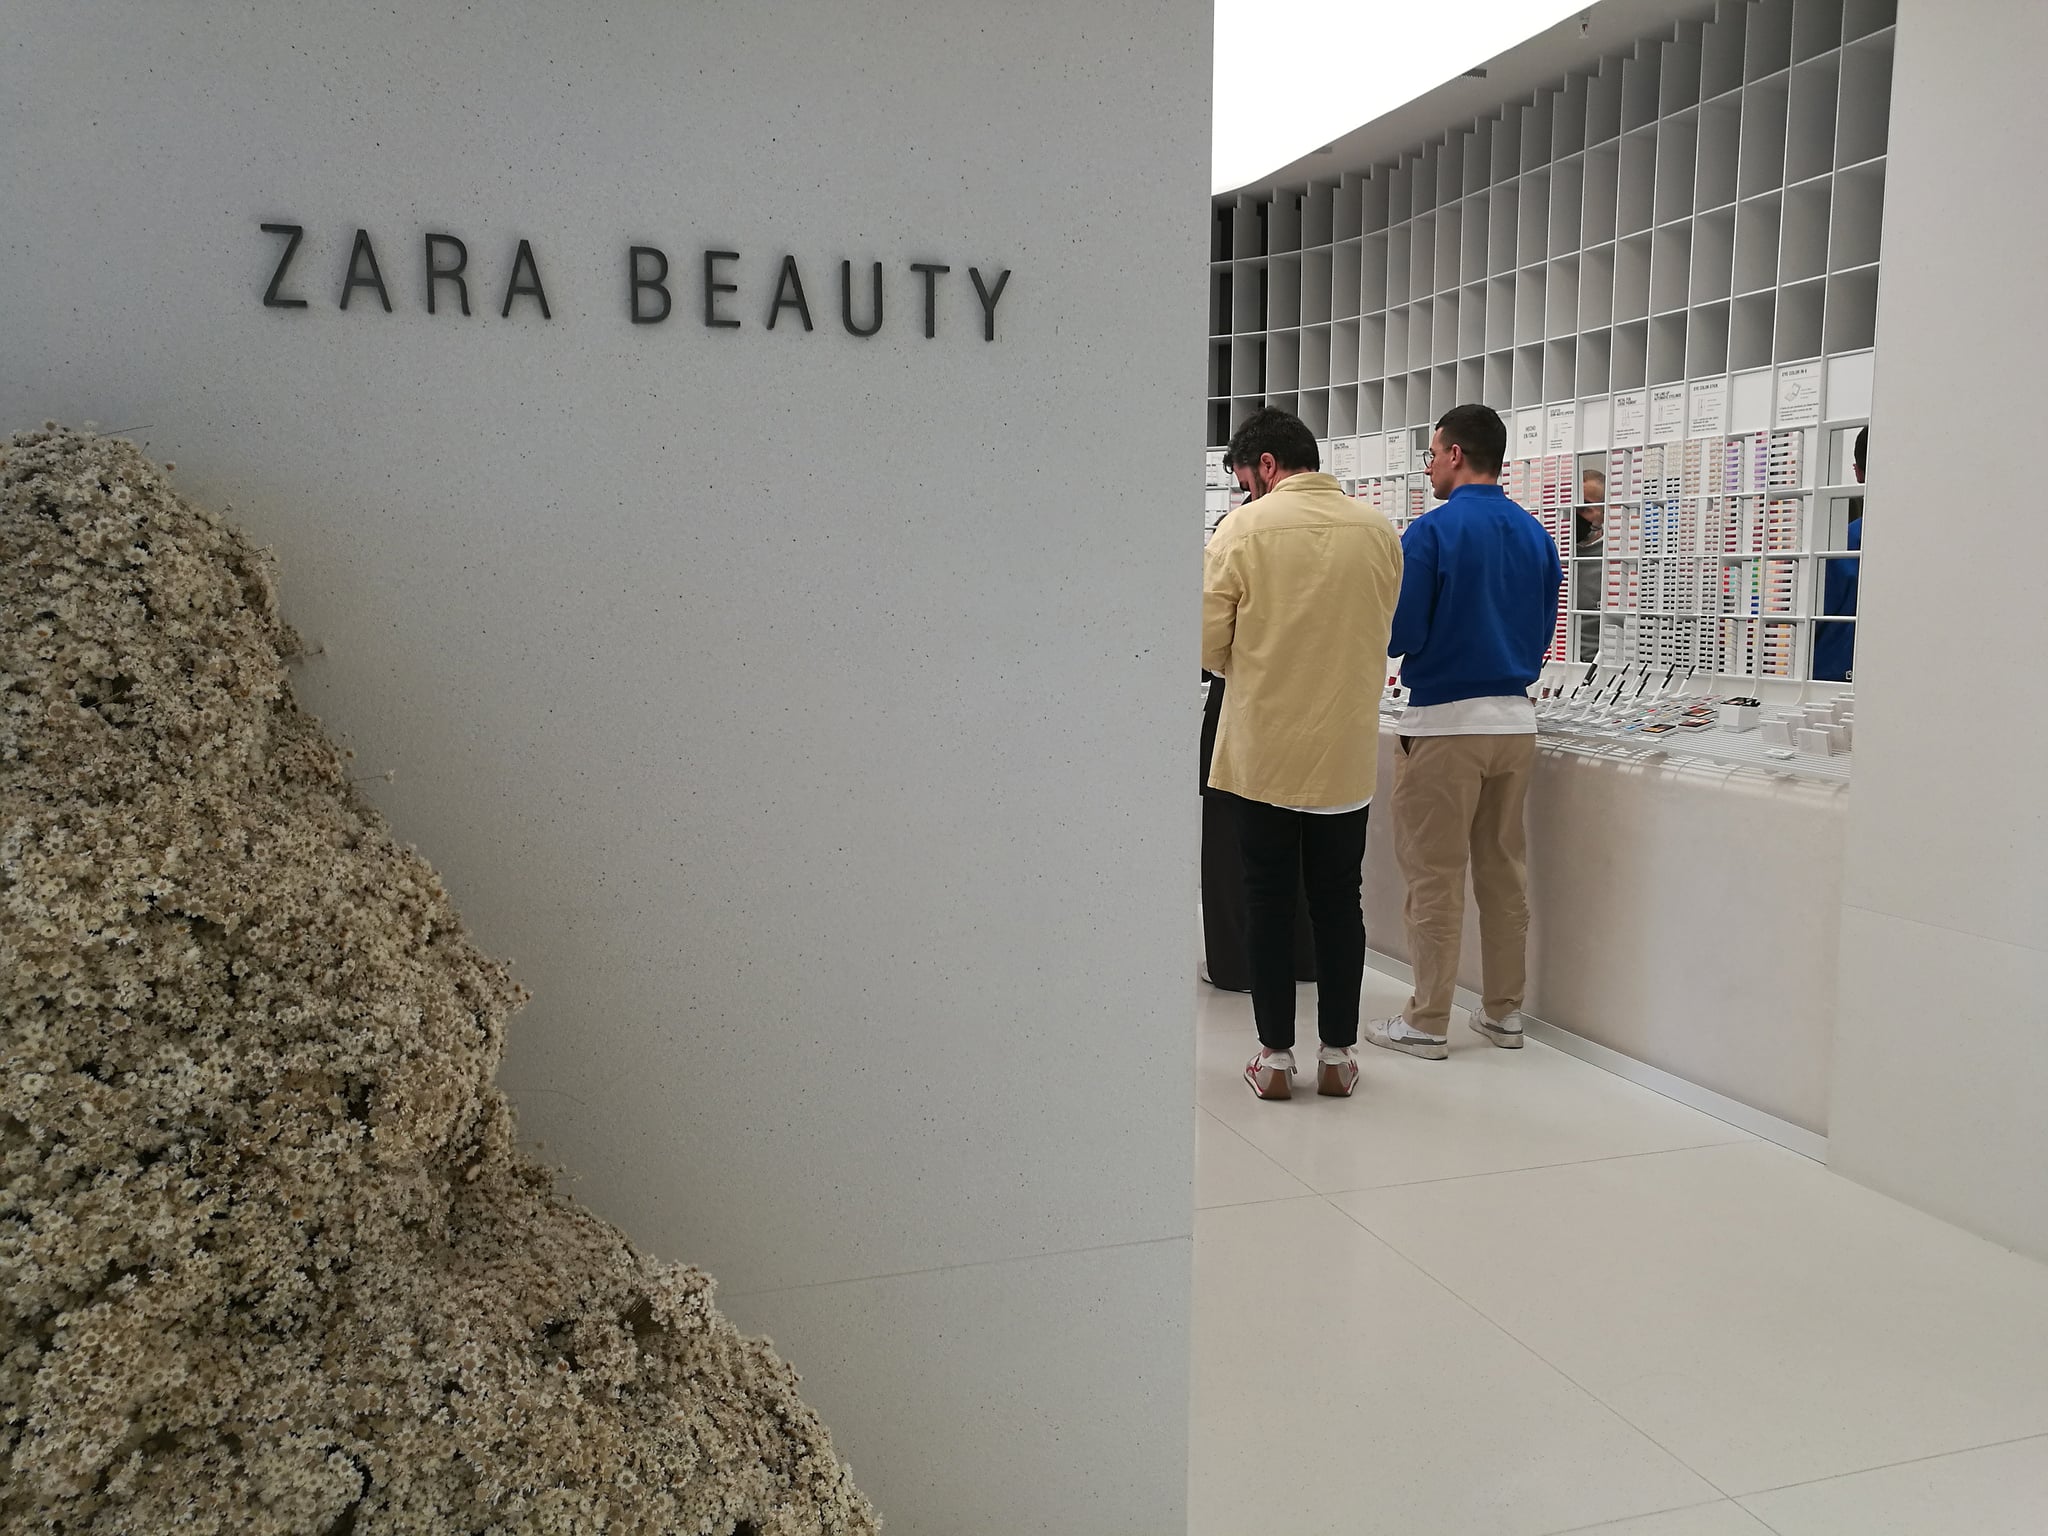 MADRID, SPAIN - APRIL 2022: Zara Beauty section in the largest Zara store in the world at Plaza de España on April 27, 2022 in Madrid, Spain.(Photo by Cristina Arias/Cover/Getty Images)